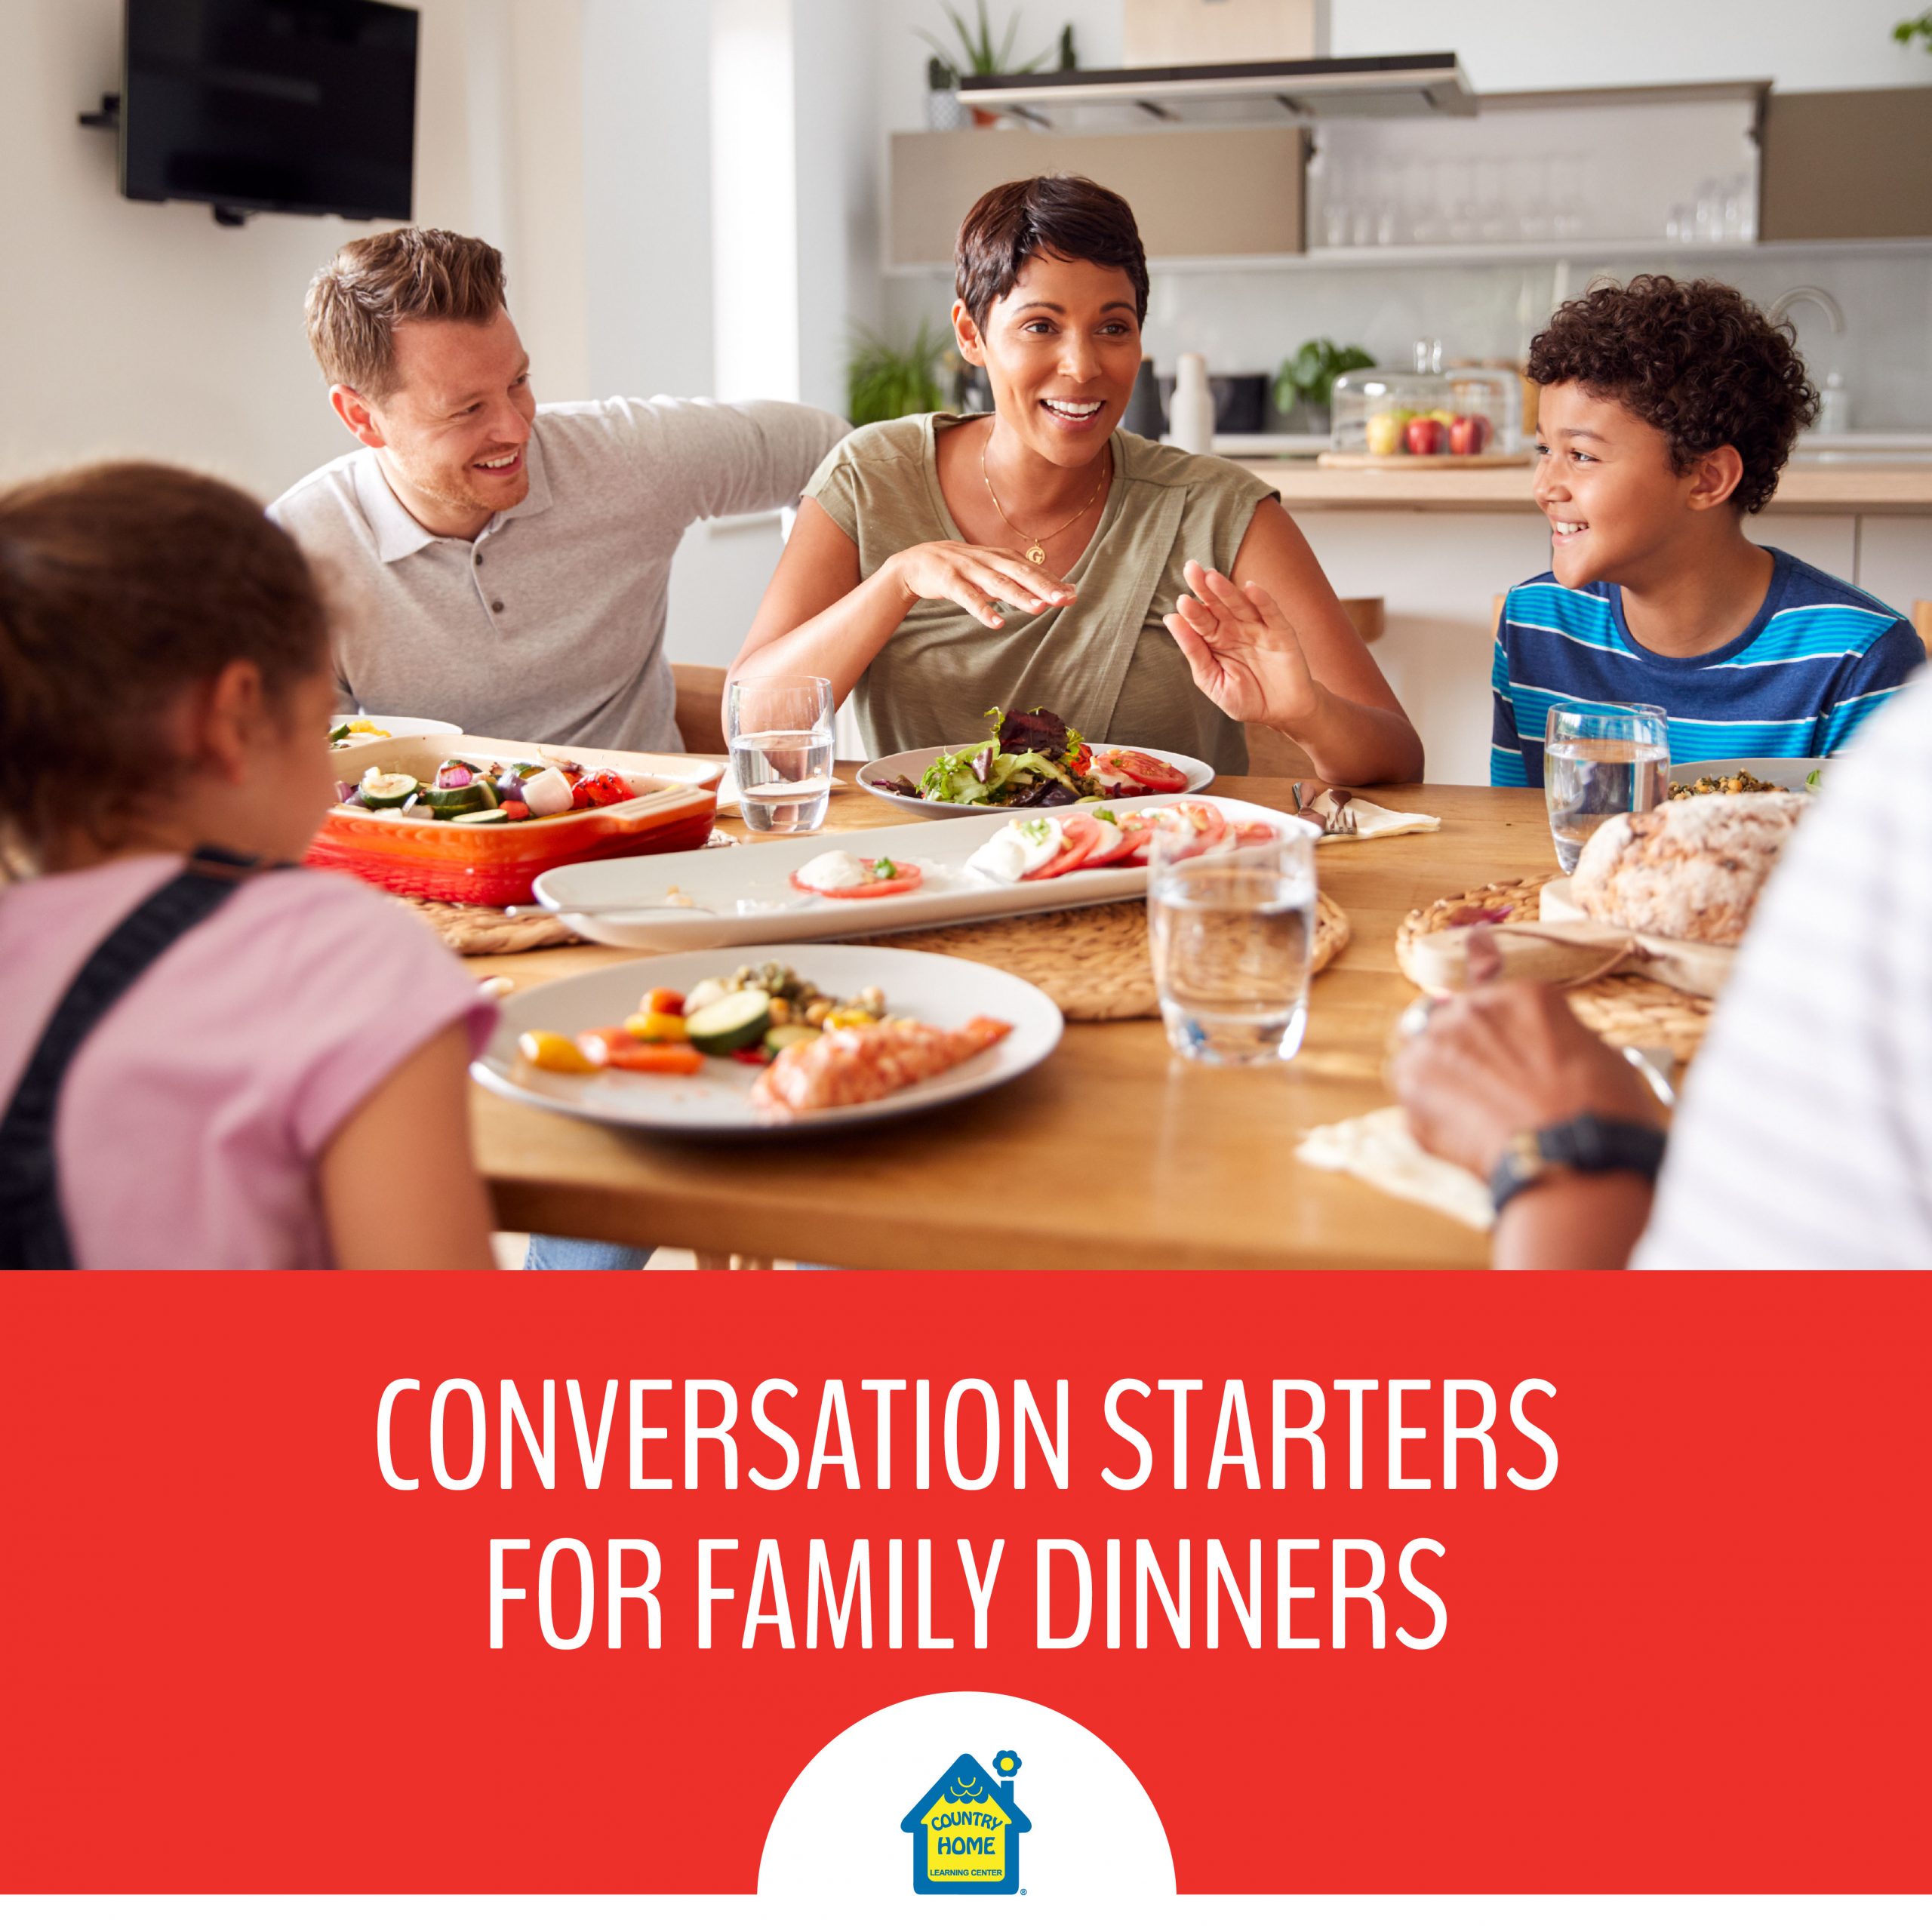 Conversation Starters for Family Dinners